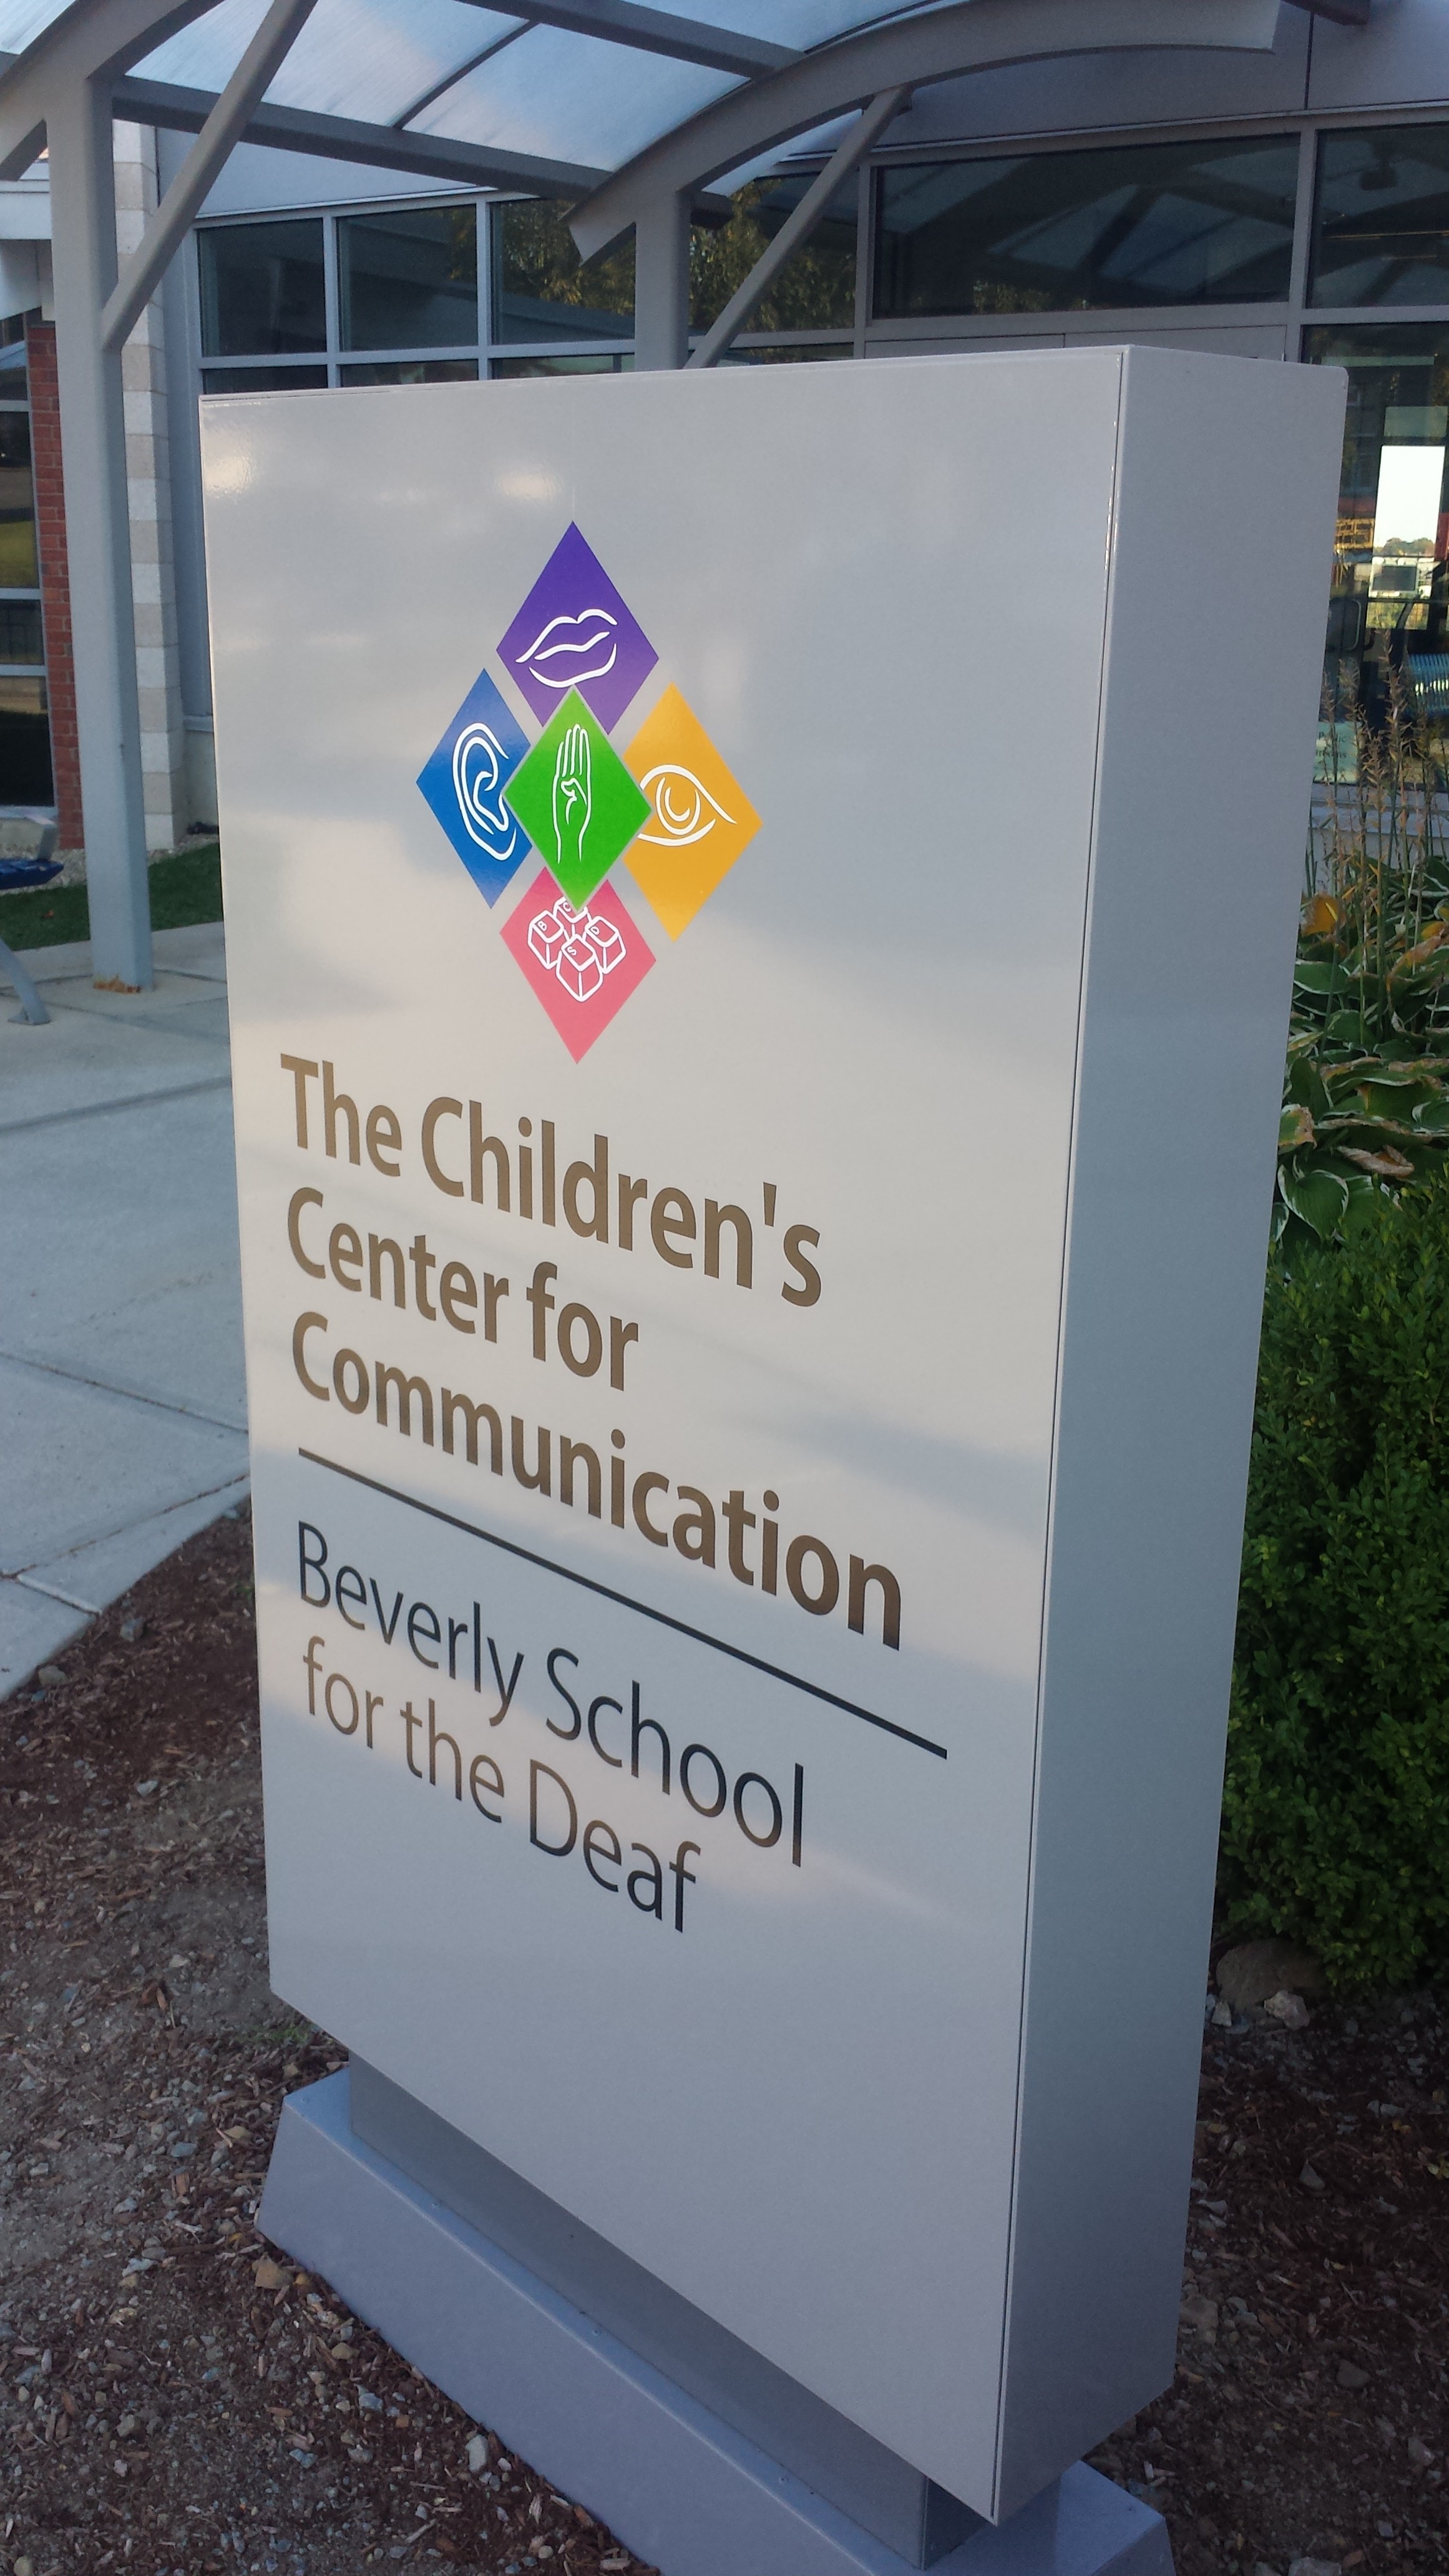 Beverly School for the Deaf - Freestanding Sign